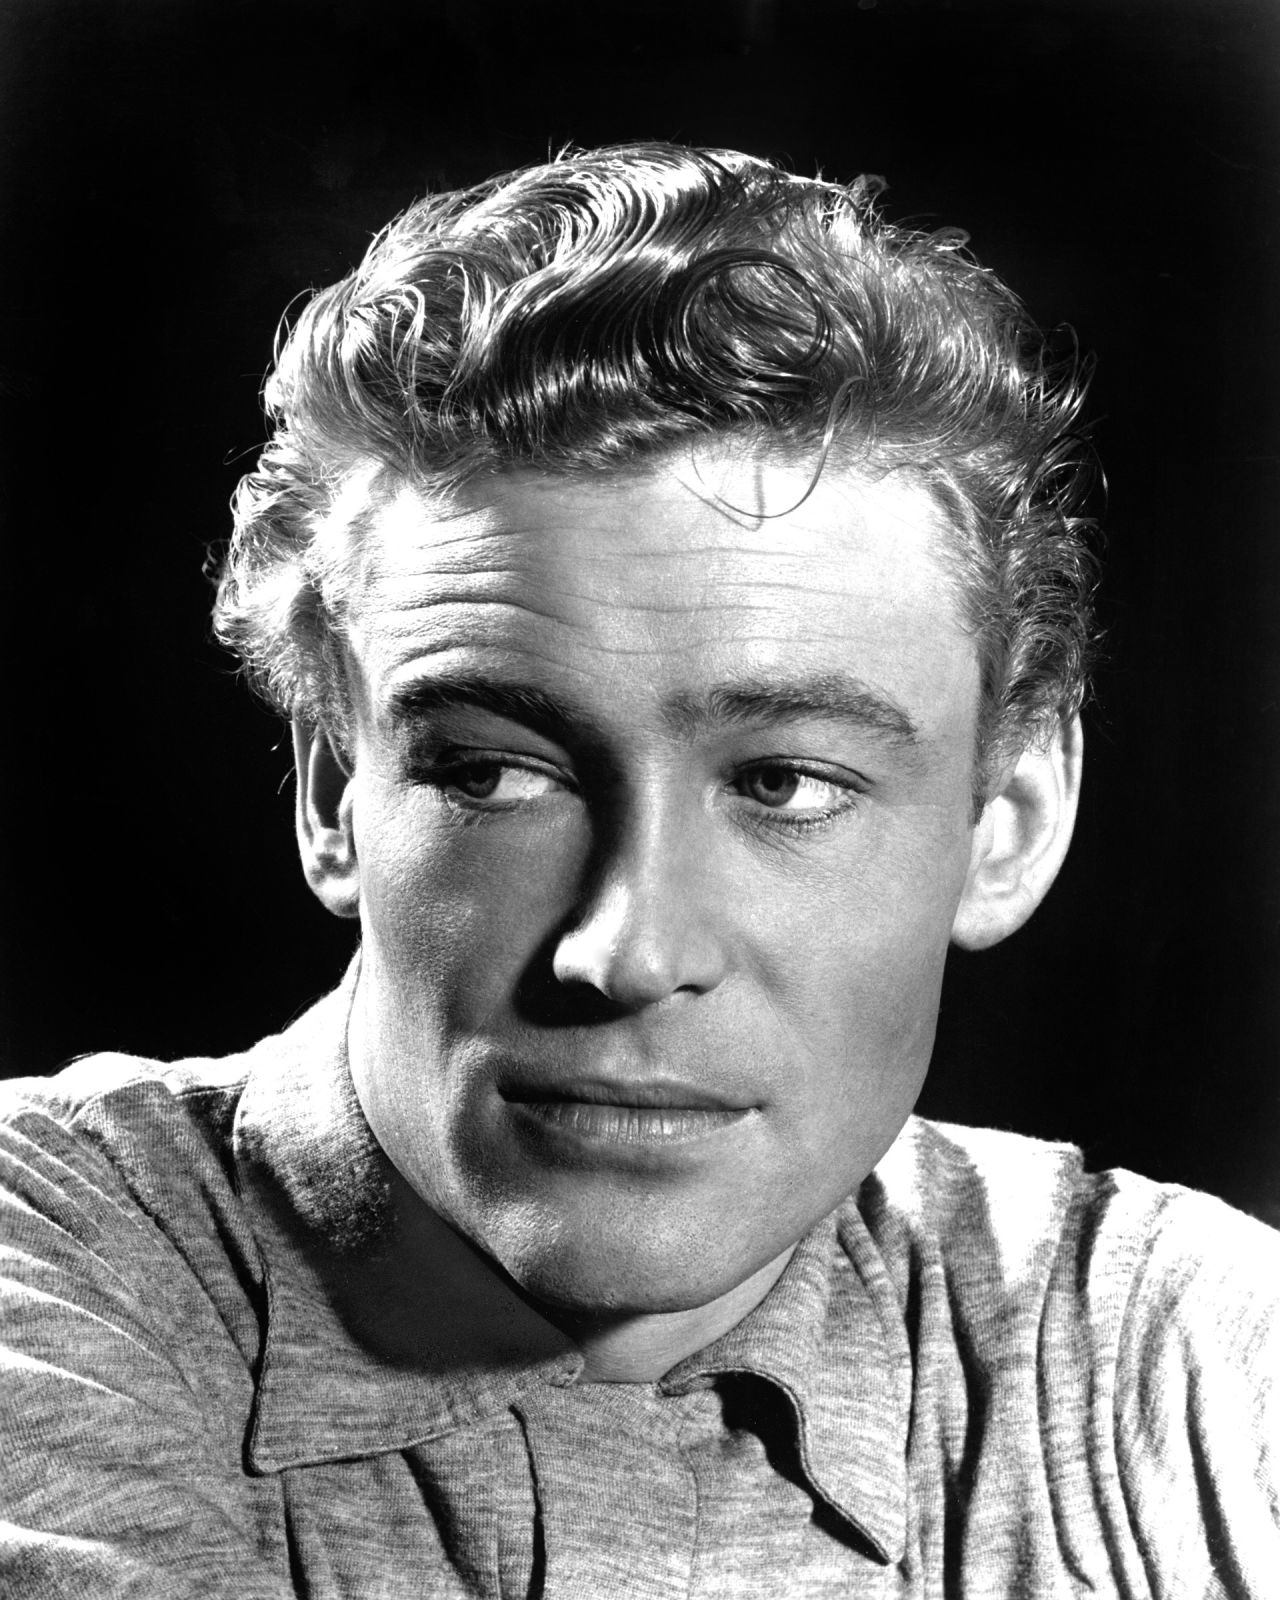 Peter O'Toole, best known for playing the title role in the 1962 film "Lawrence of Arabia," died on Saturday, December 14. He was 81.